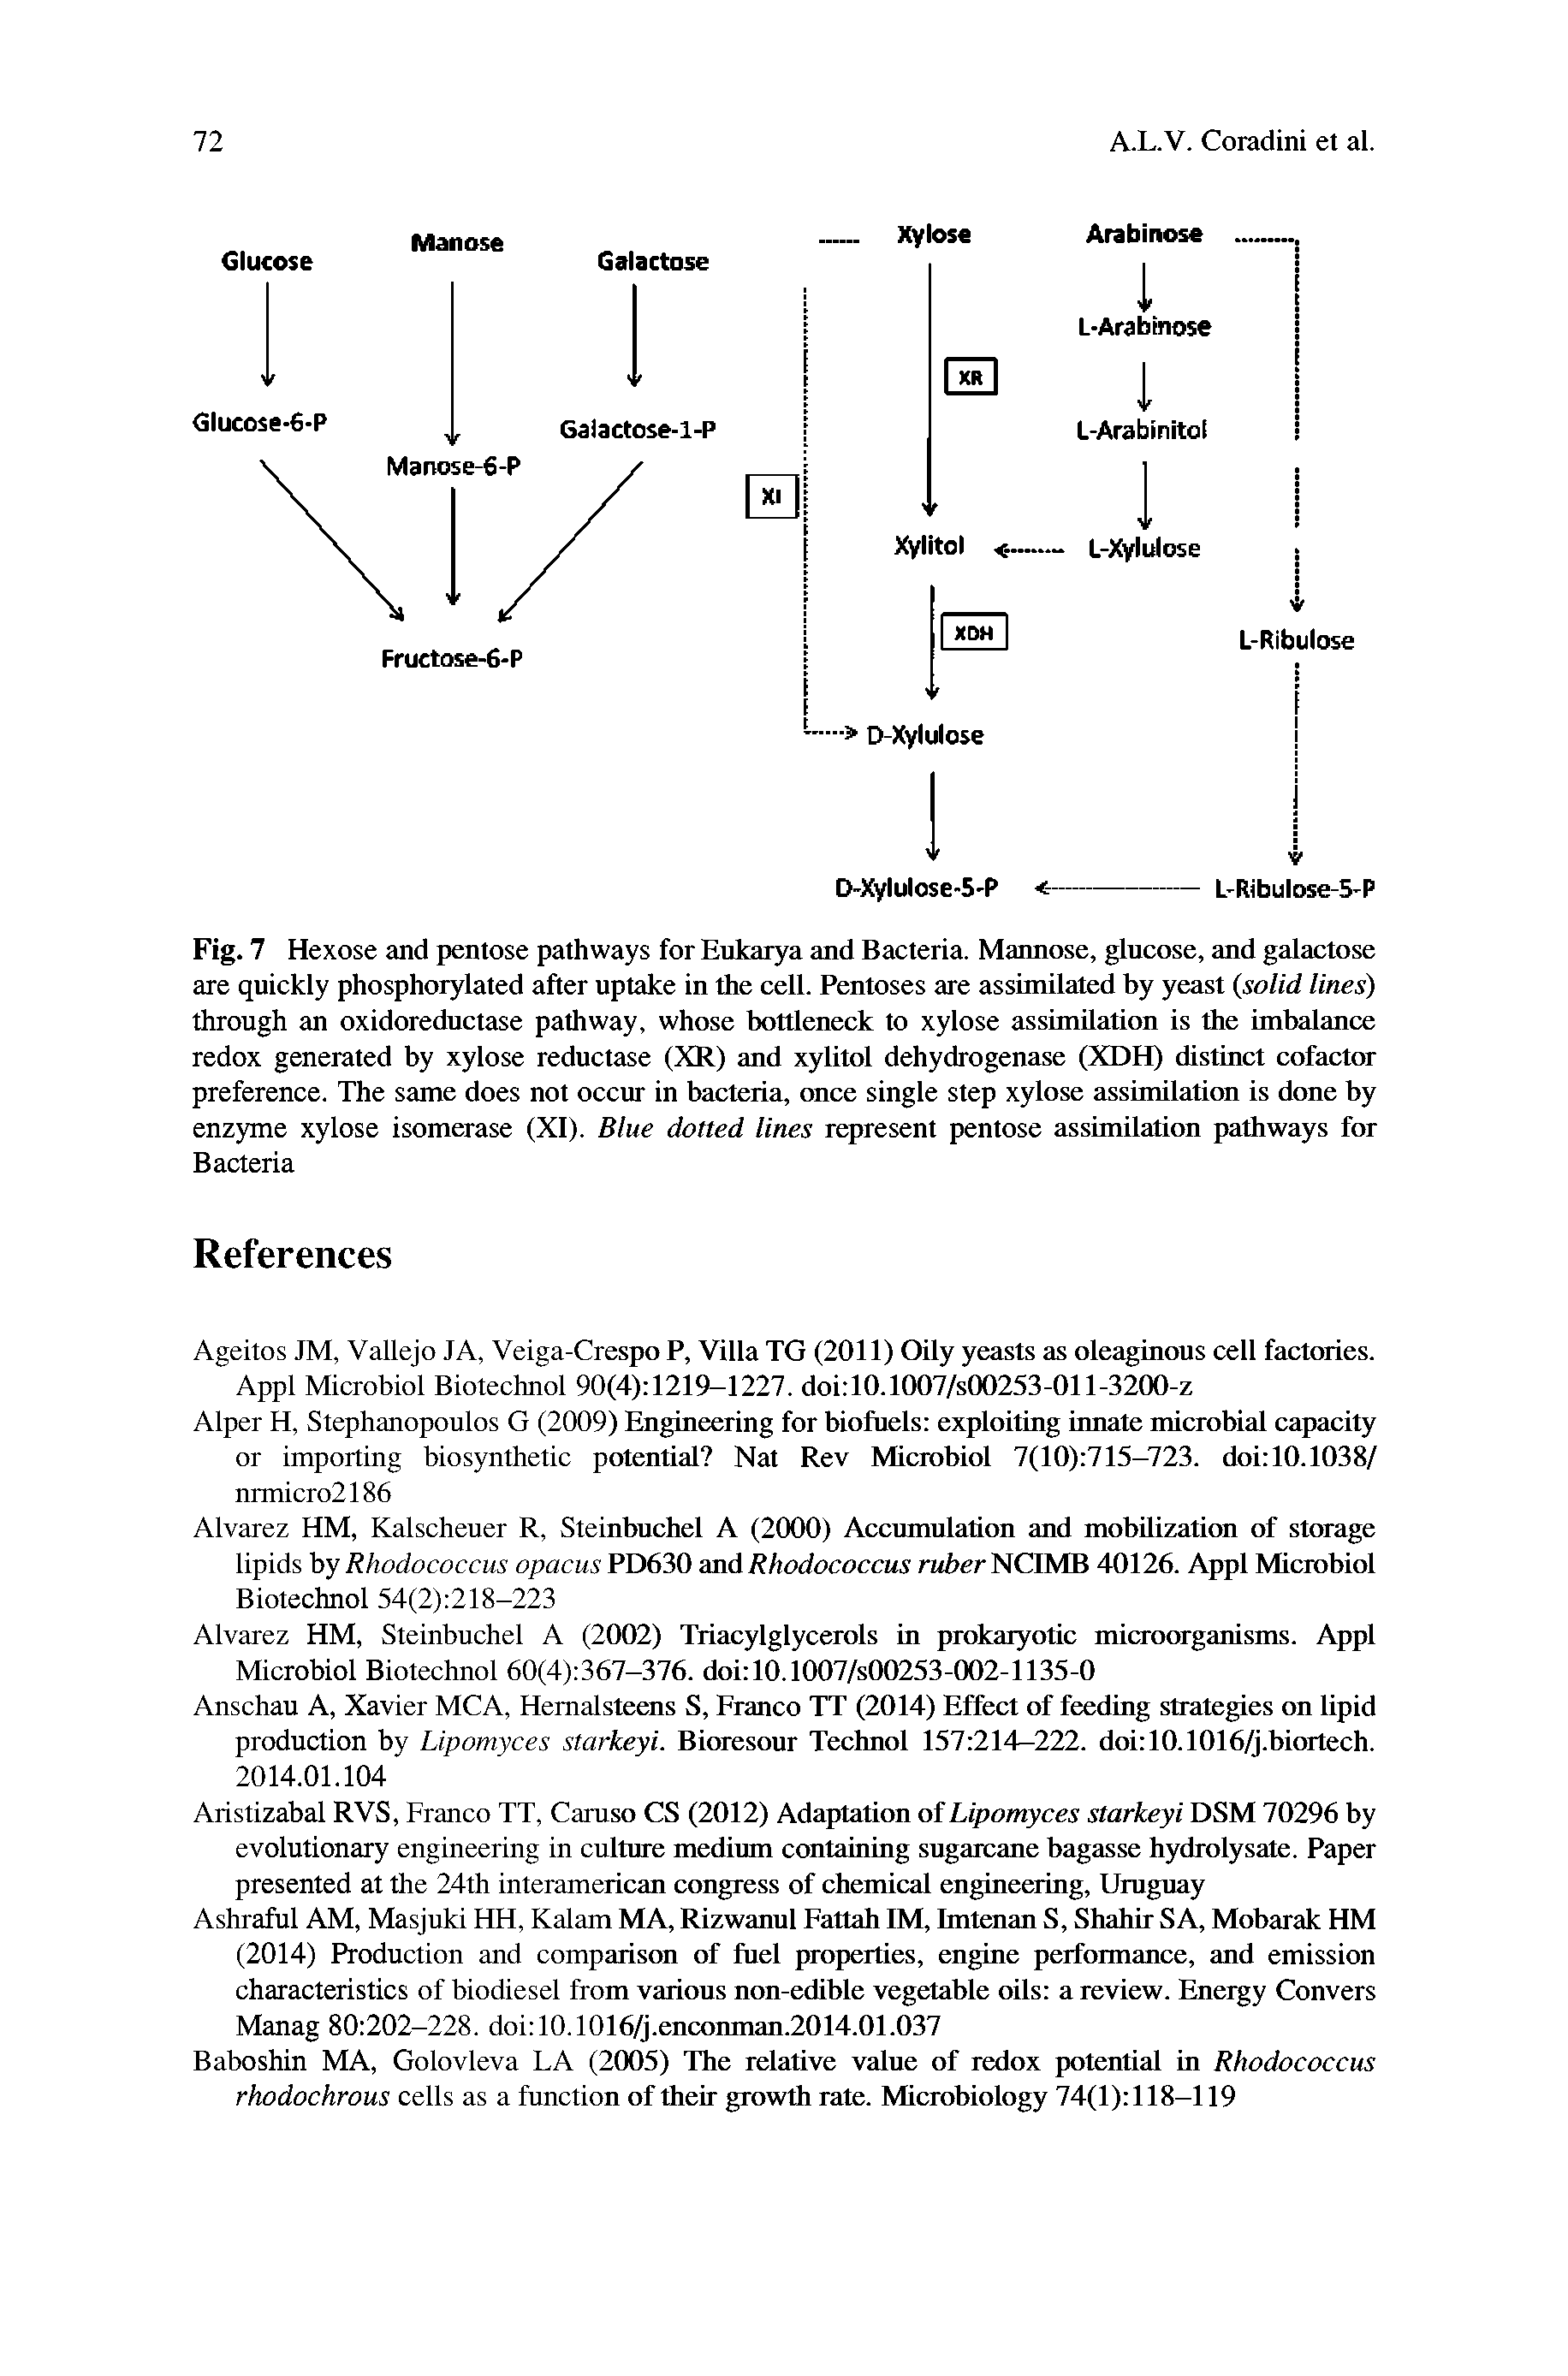 Fig. 7 Hexose and pentose pathways for Eukarya and Bacteria. Mannose, glucose, and galactose are quickly phosphorylated after uptake in the cell. Pentoses are assimilated by yeast (solid lines) through an oxidoreductase pathway, whose bottleneck to xylose assimilation is the imbalance redox generated by xylose reductase (XR) and xylitol dehydrogenase (XDH) distinct cofactor preference. The same does not occur in bacteria, once single step xylose assimilation is done by enzyme xylose isomerase (XI). Blue dotted lines represent pentose assimilation pathways for Bacteria...